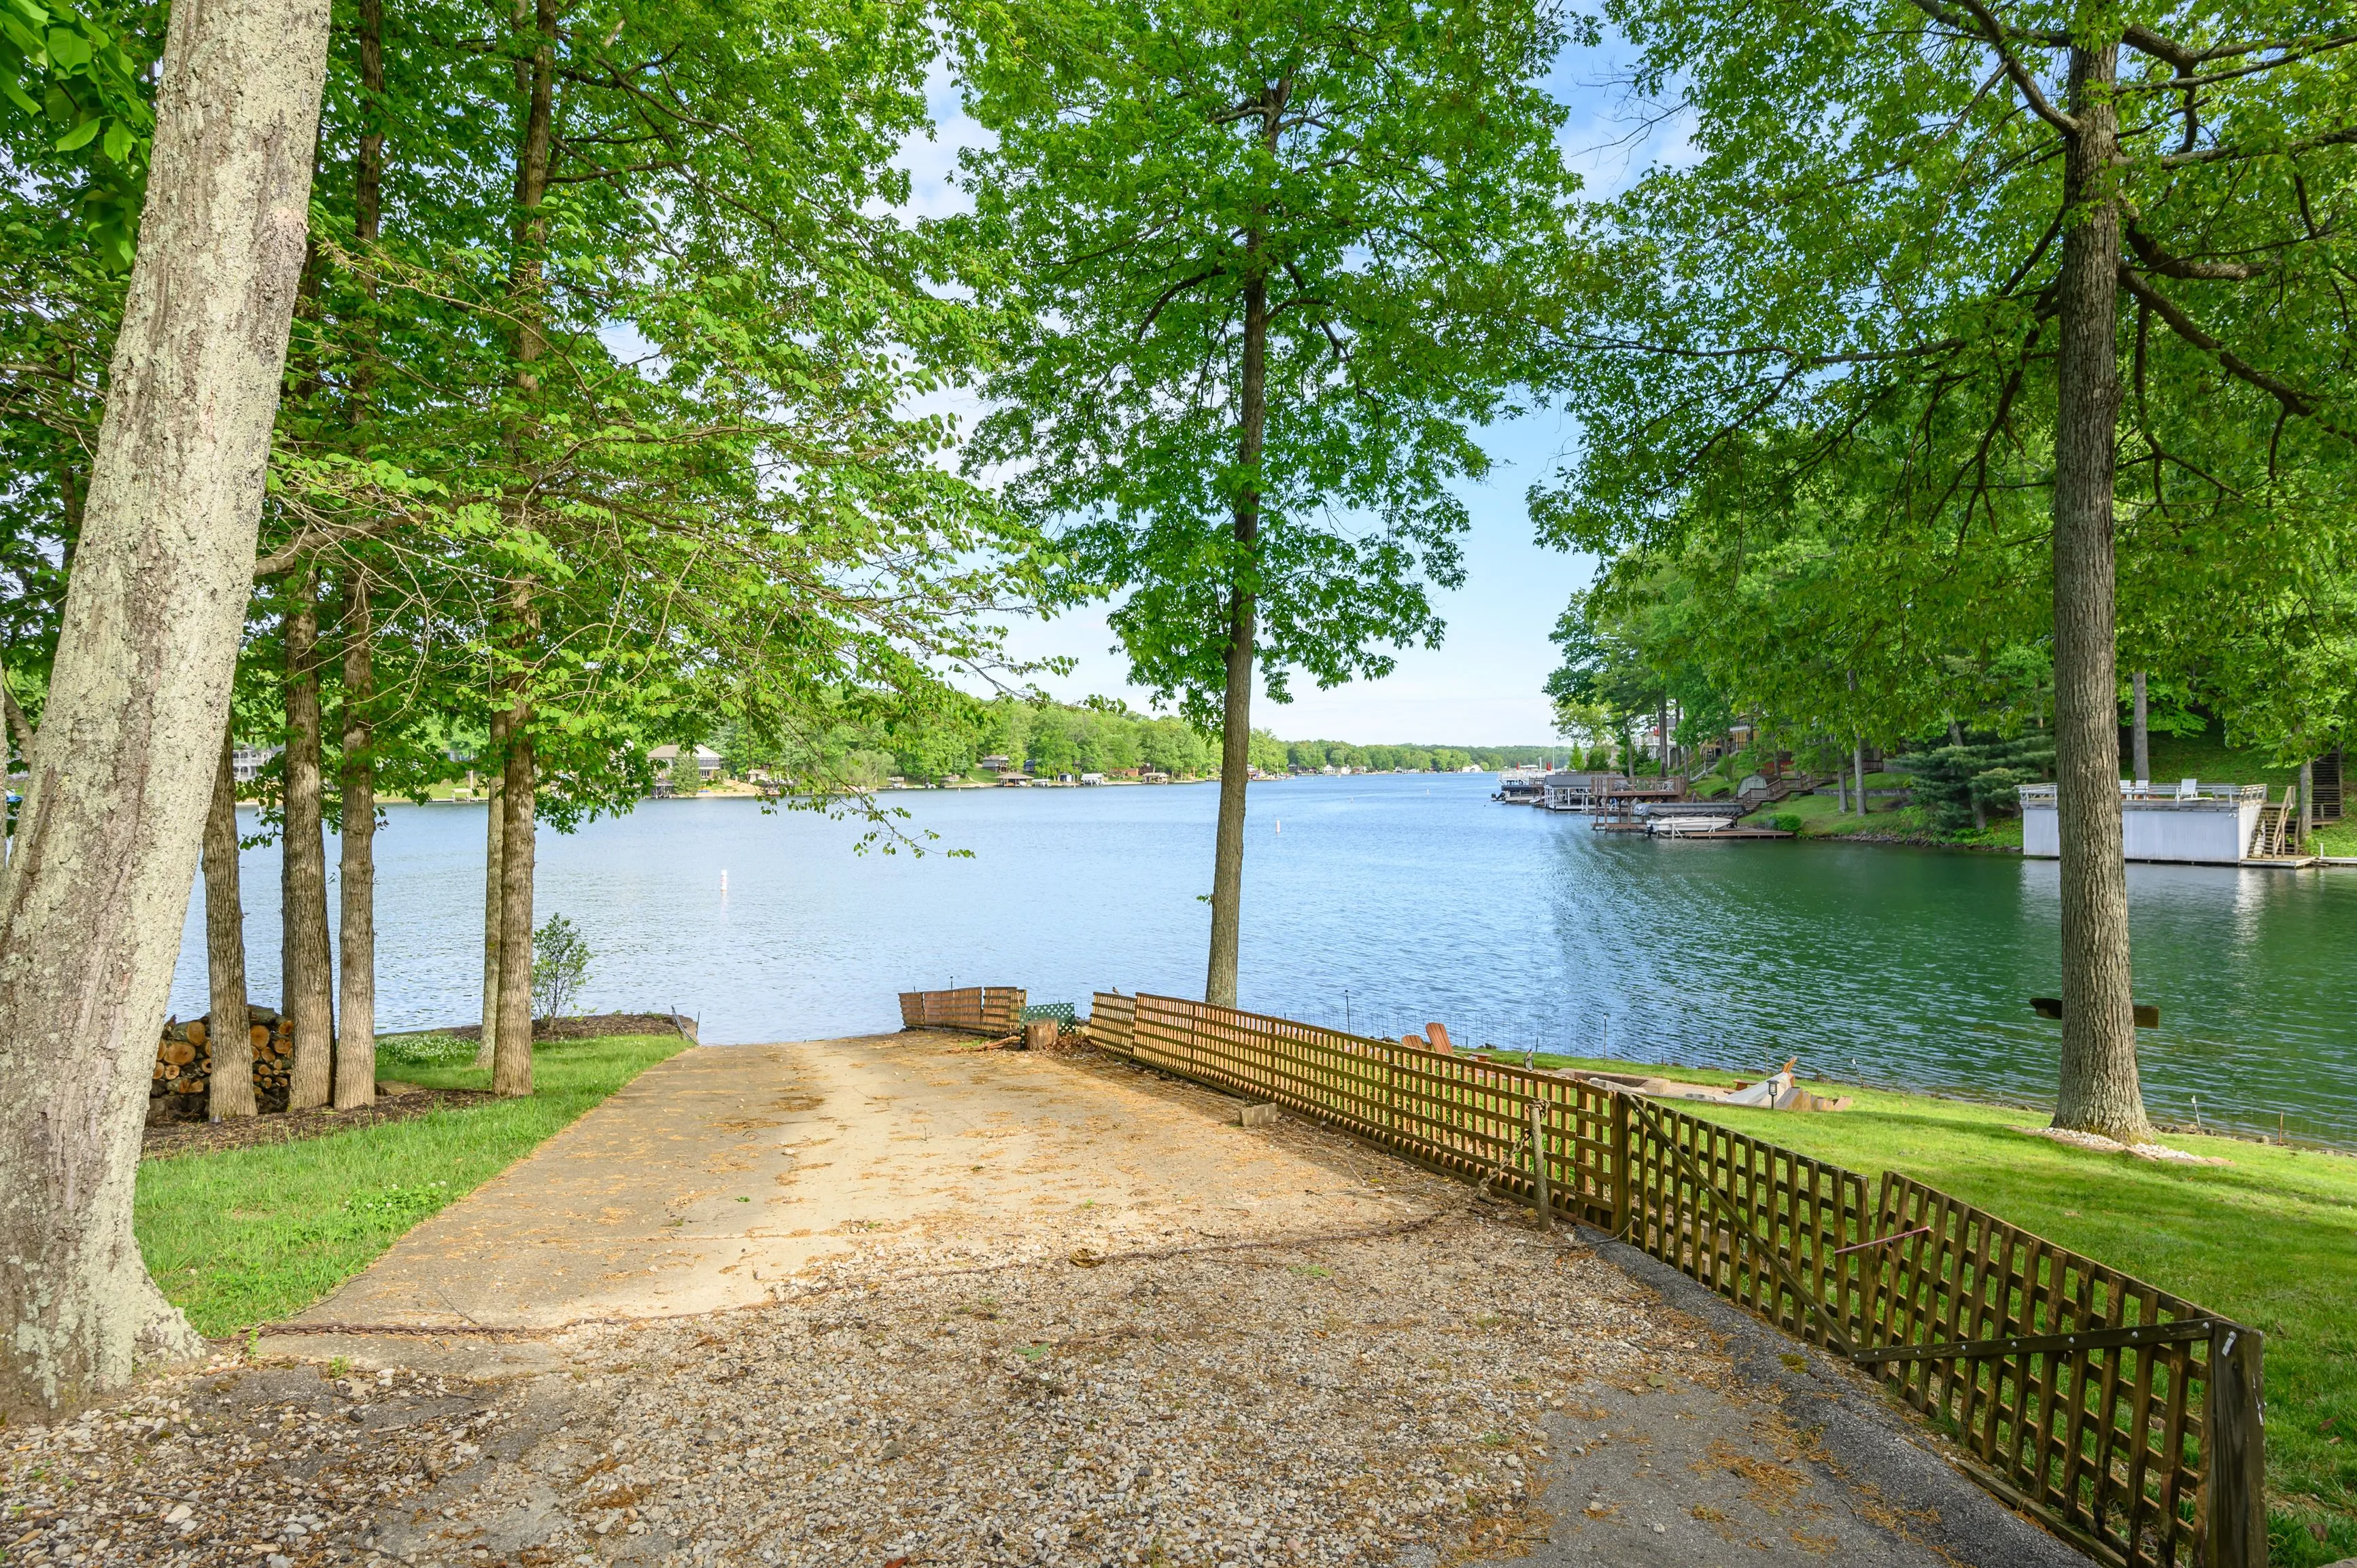 Gravel path leading to a tranquil lake surrounded by green trees with a wooden fence on one side.